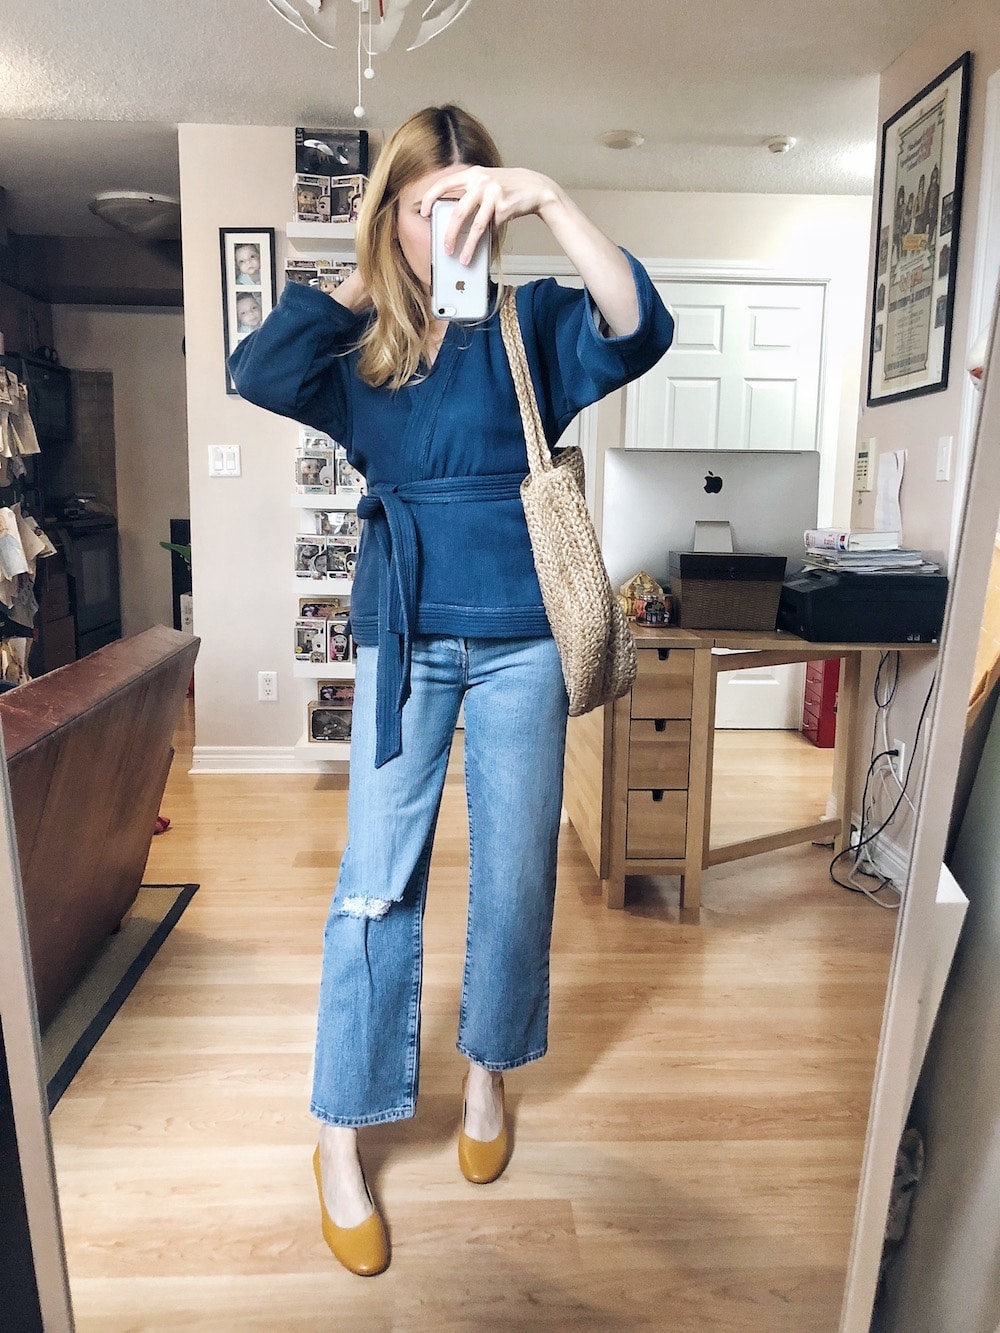 What I wore this week. I am wearing a Madewell kimono jacket top, Levi's Ribcage jeans, A woven bag, and Everlane Day Heels. #livelovesara